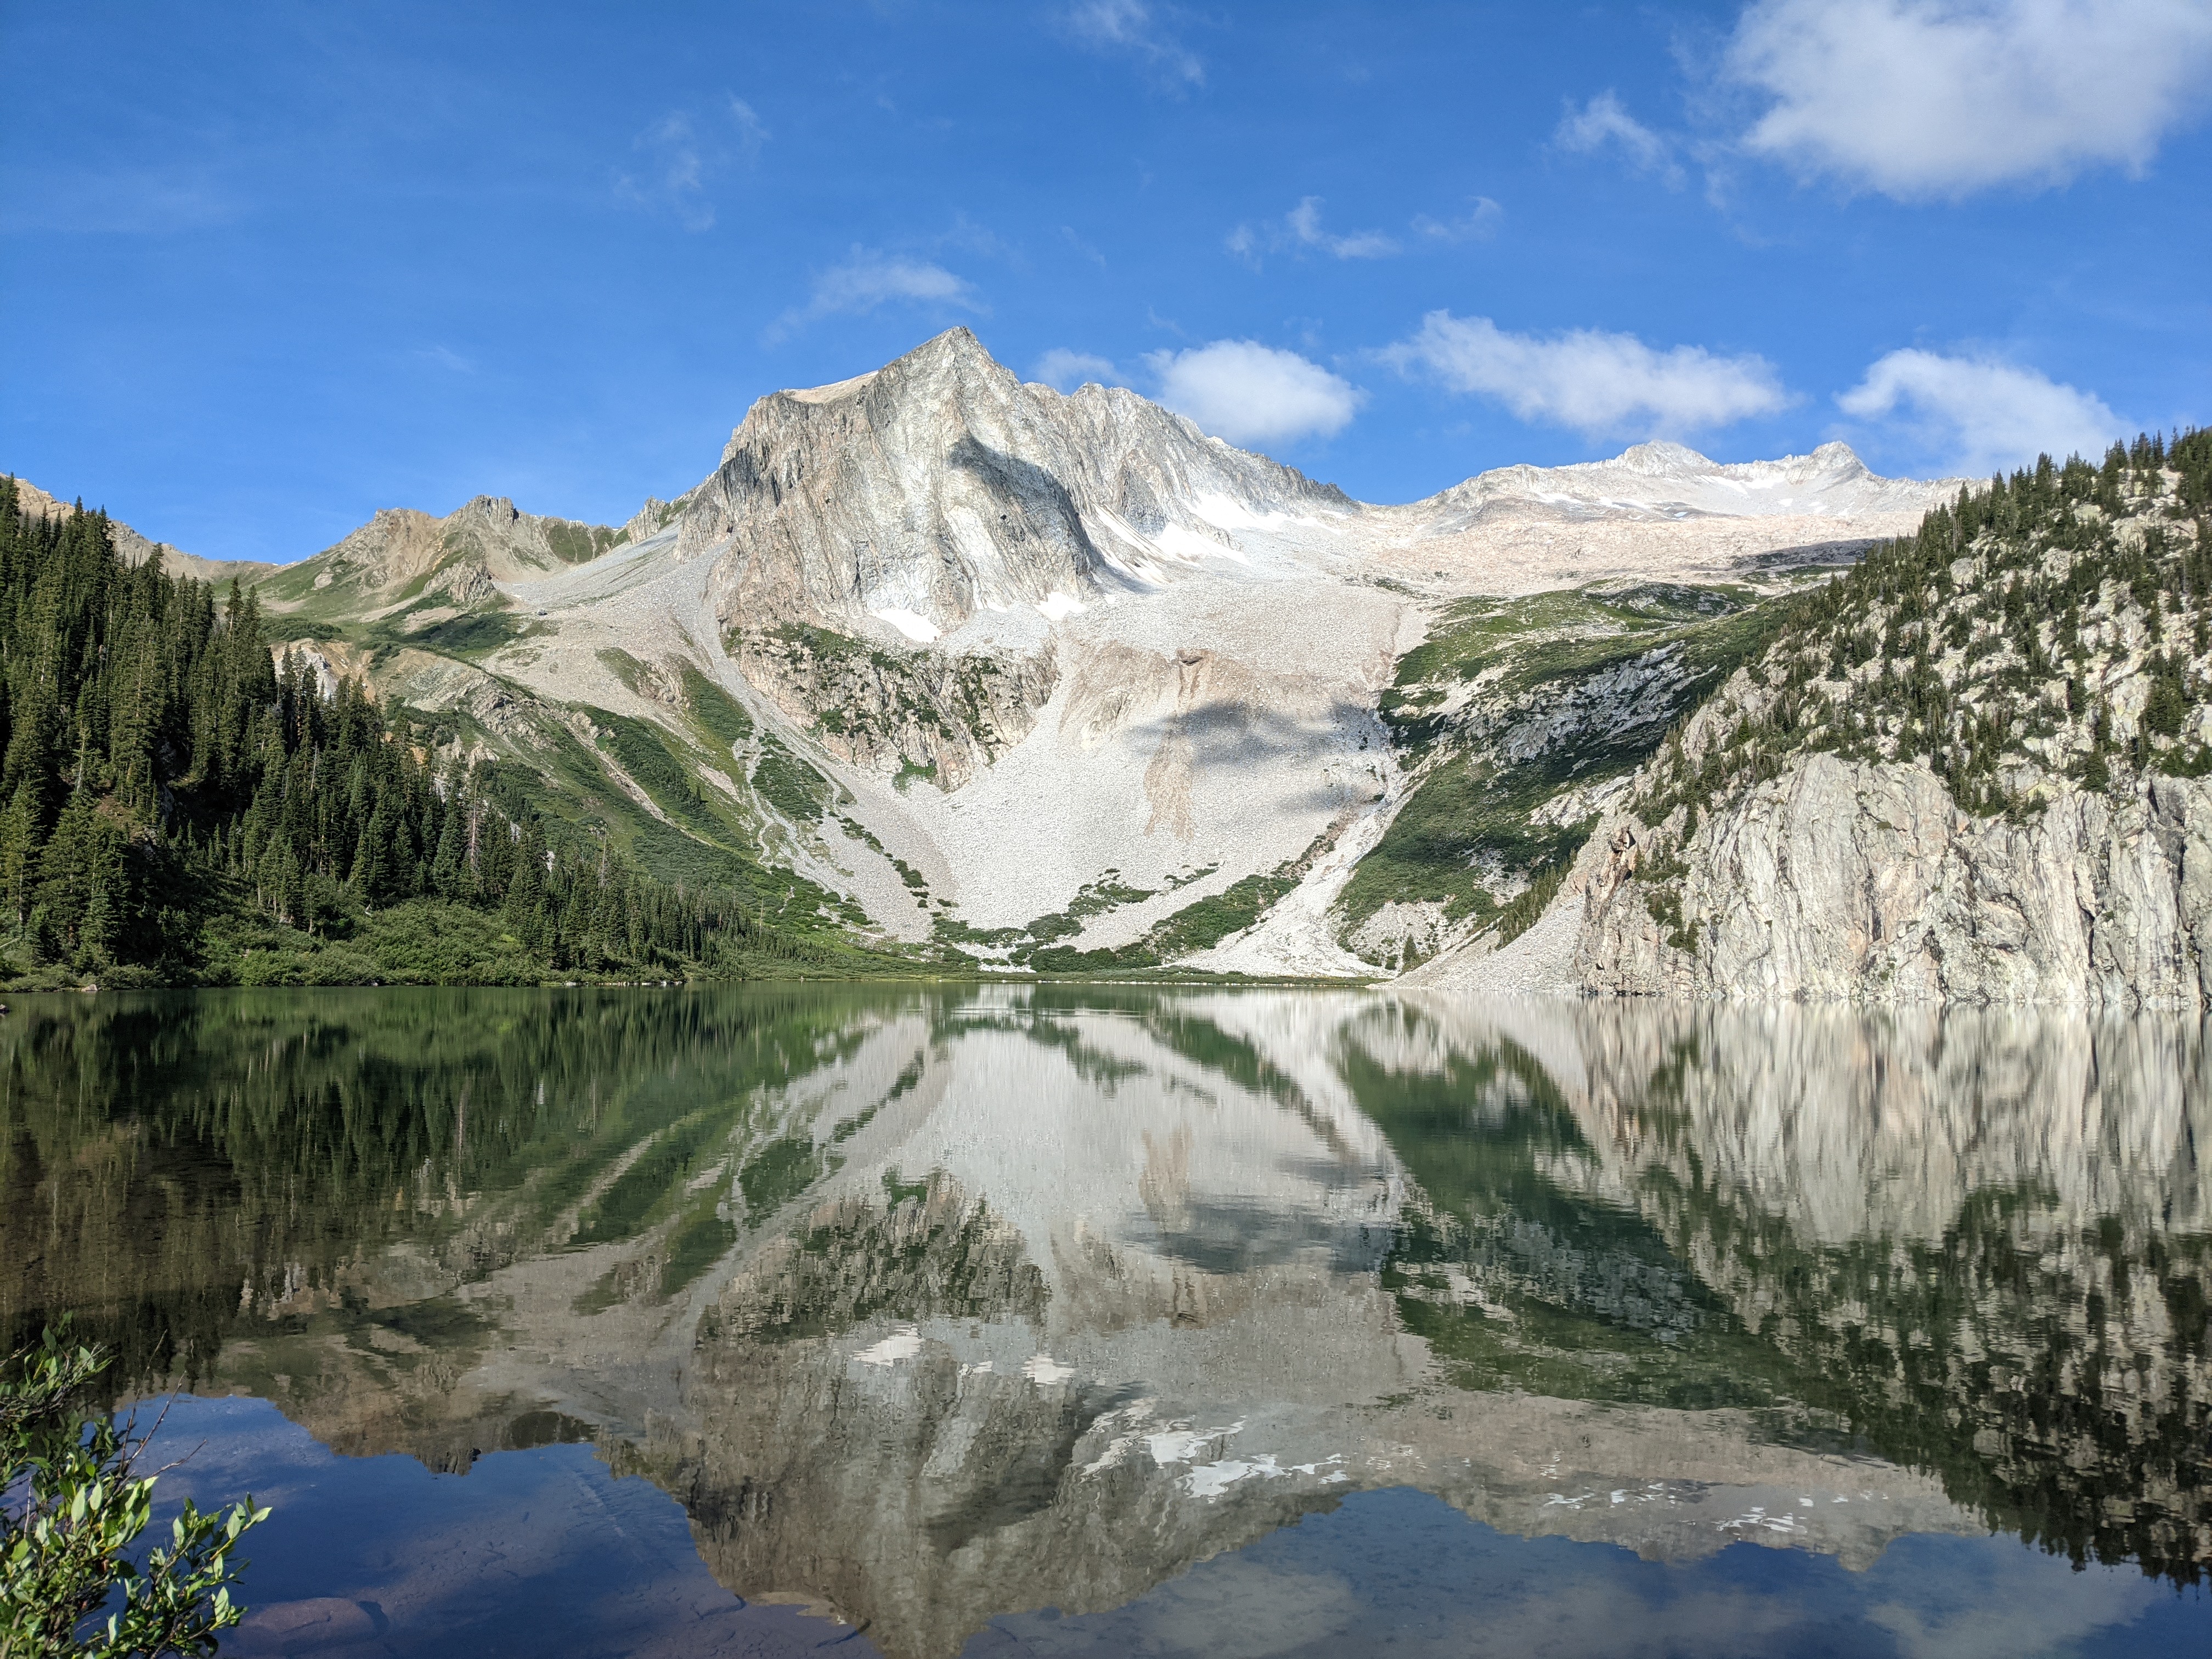 Snowmass Lake, the first major stopping point on Four Pass Loop.